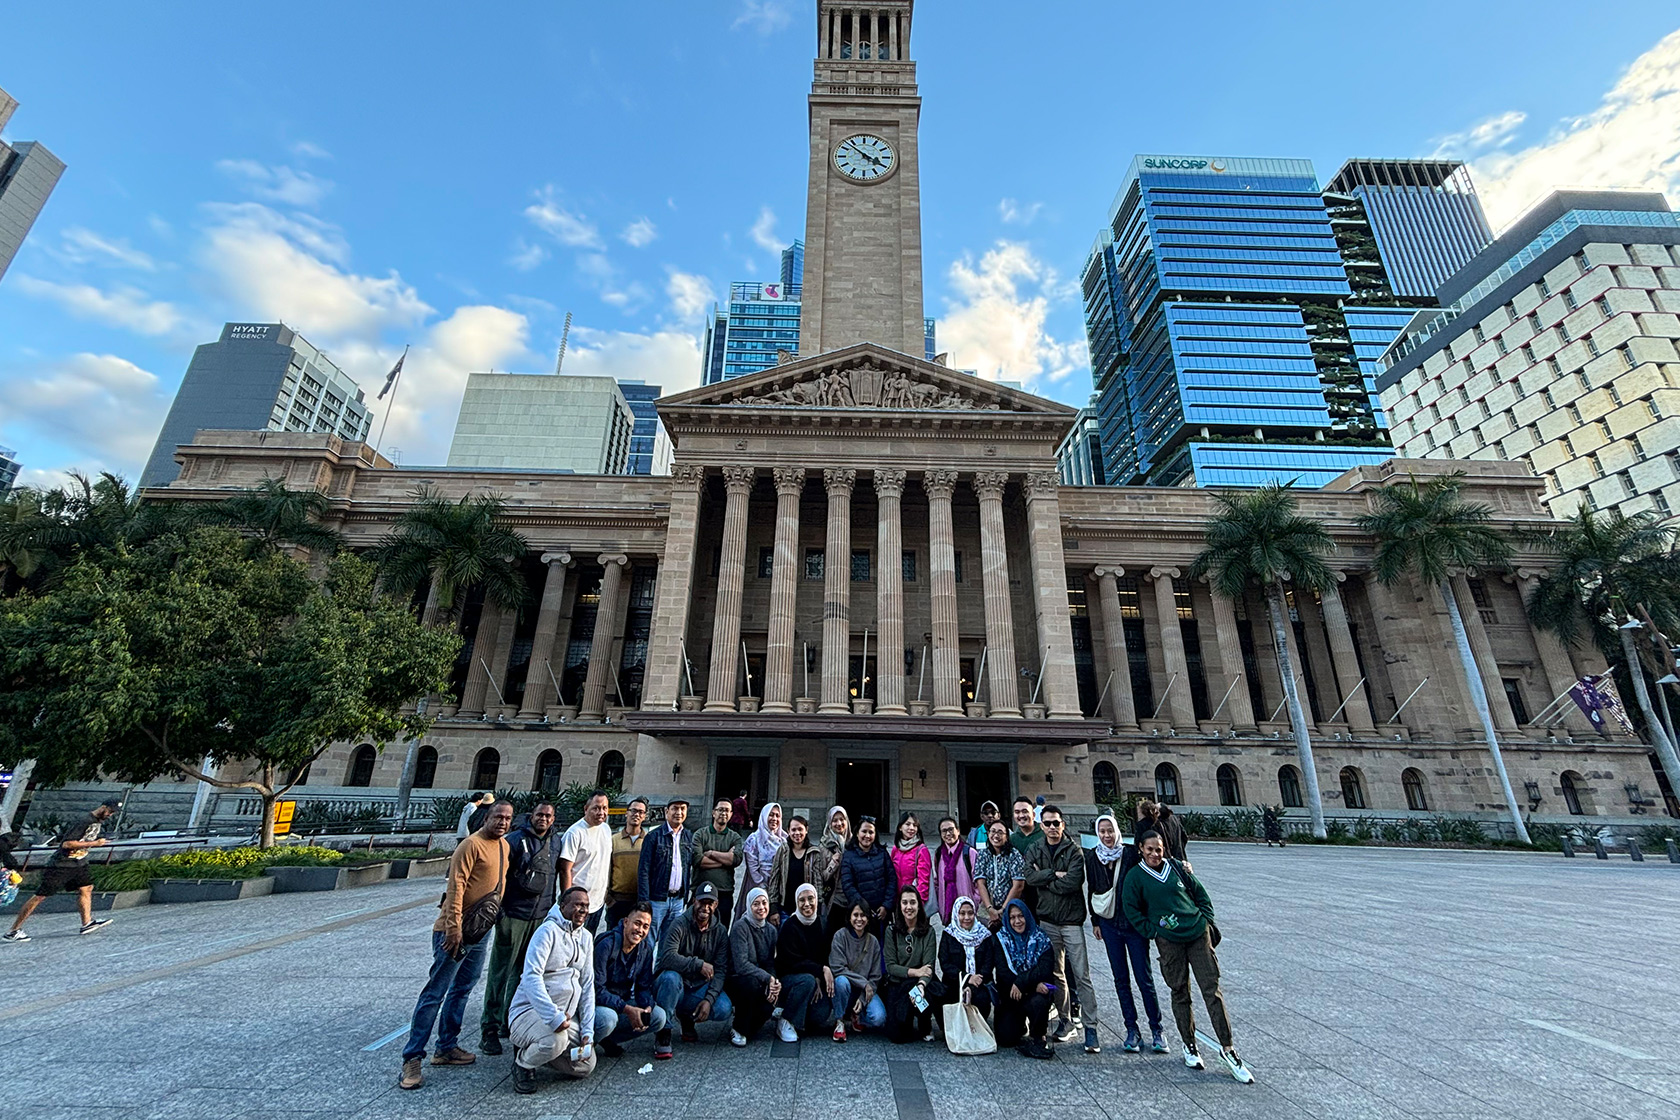 Our short course participants pose together with the Brisbane City Council building in the background.